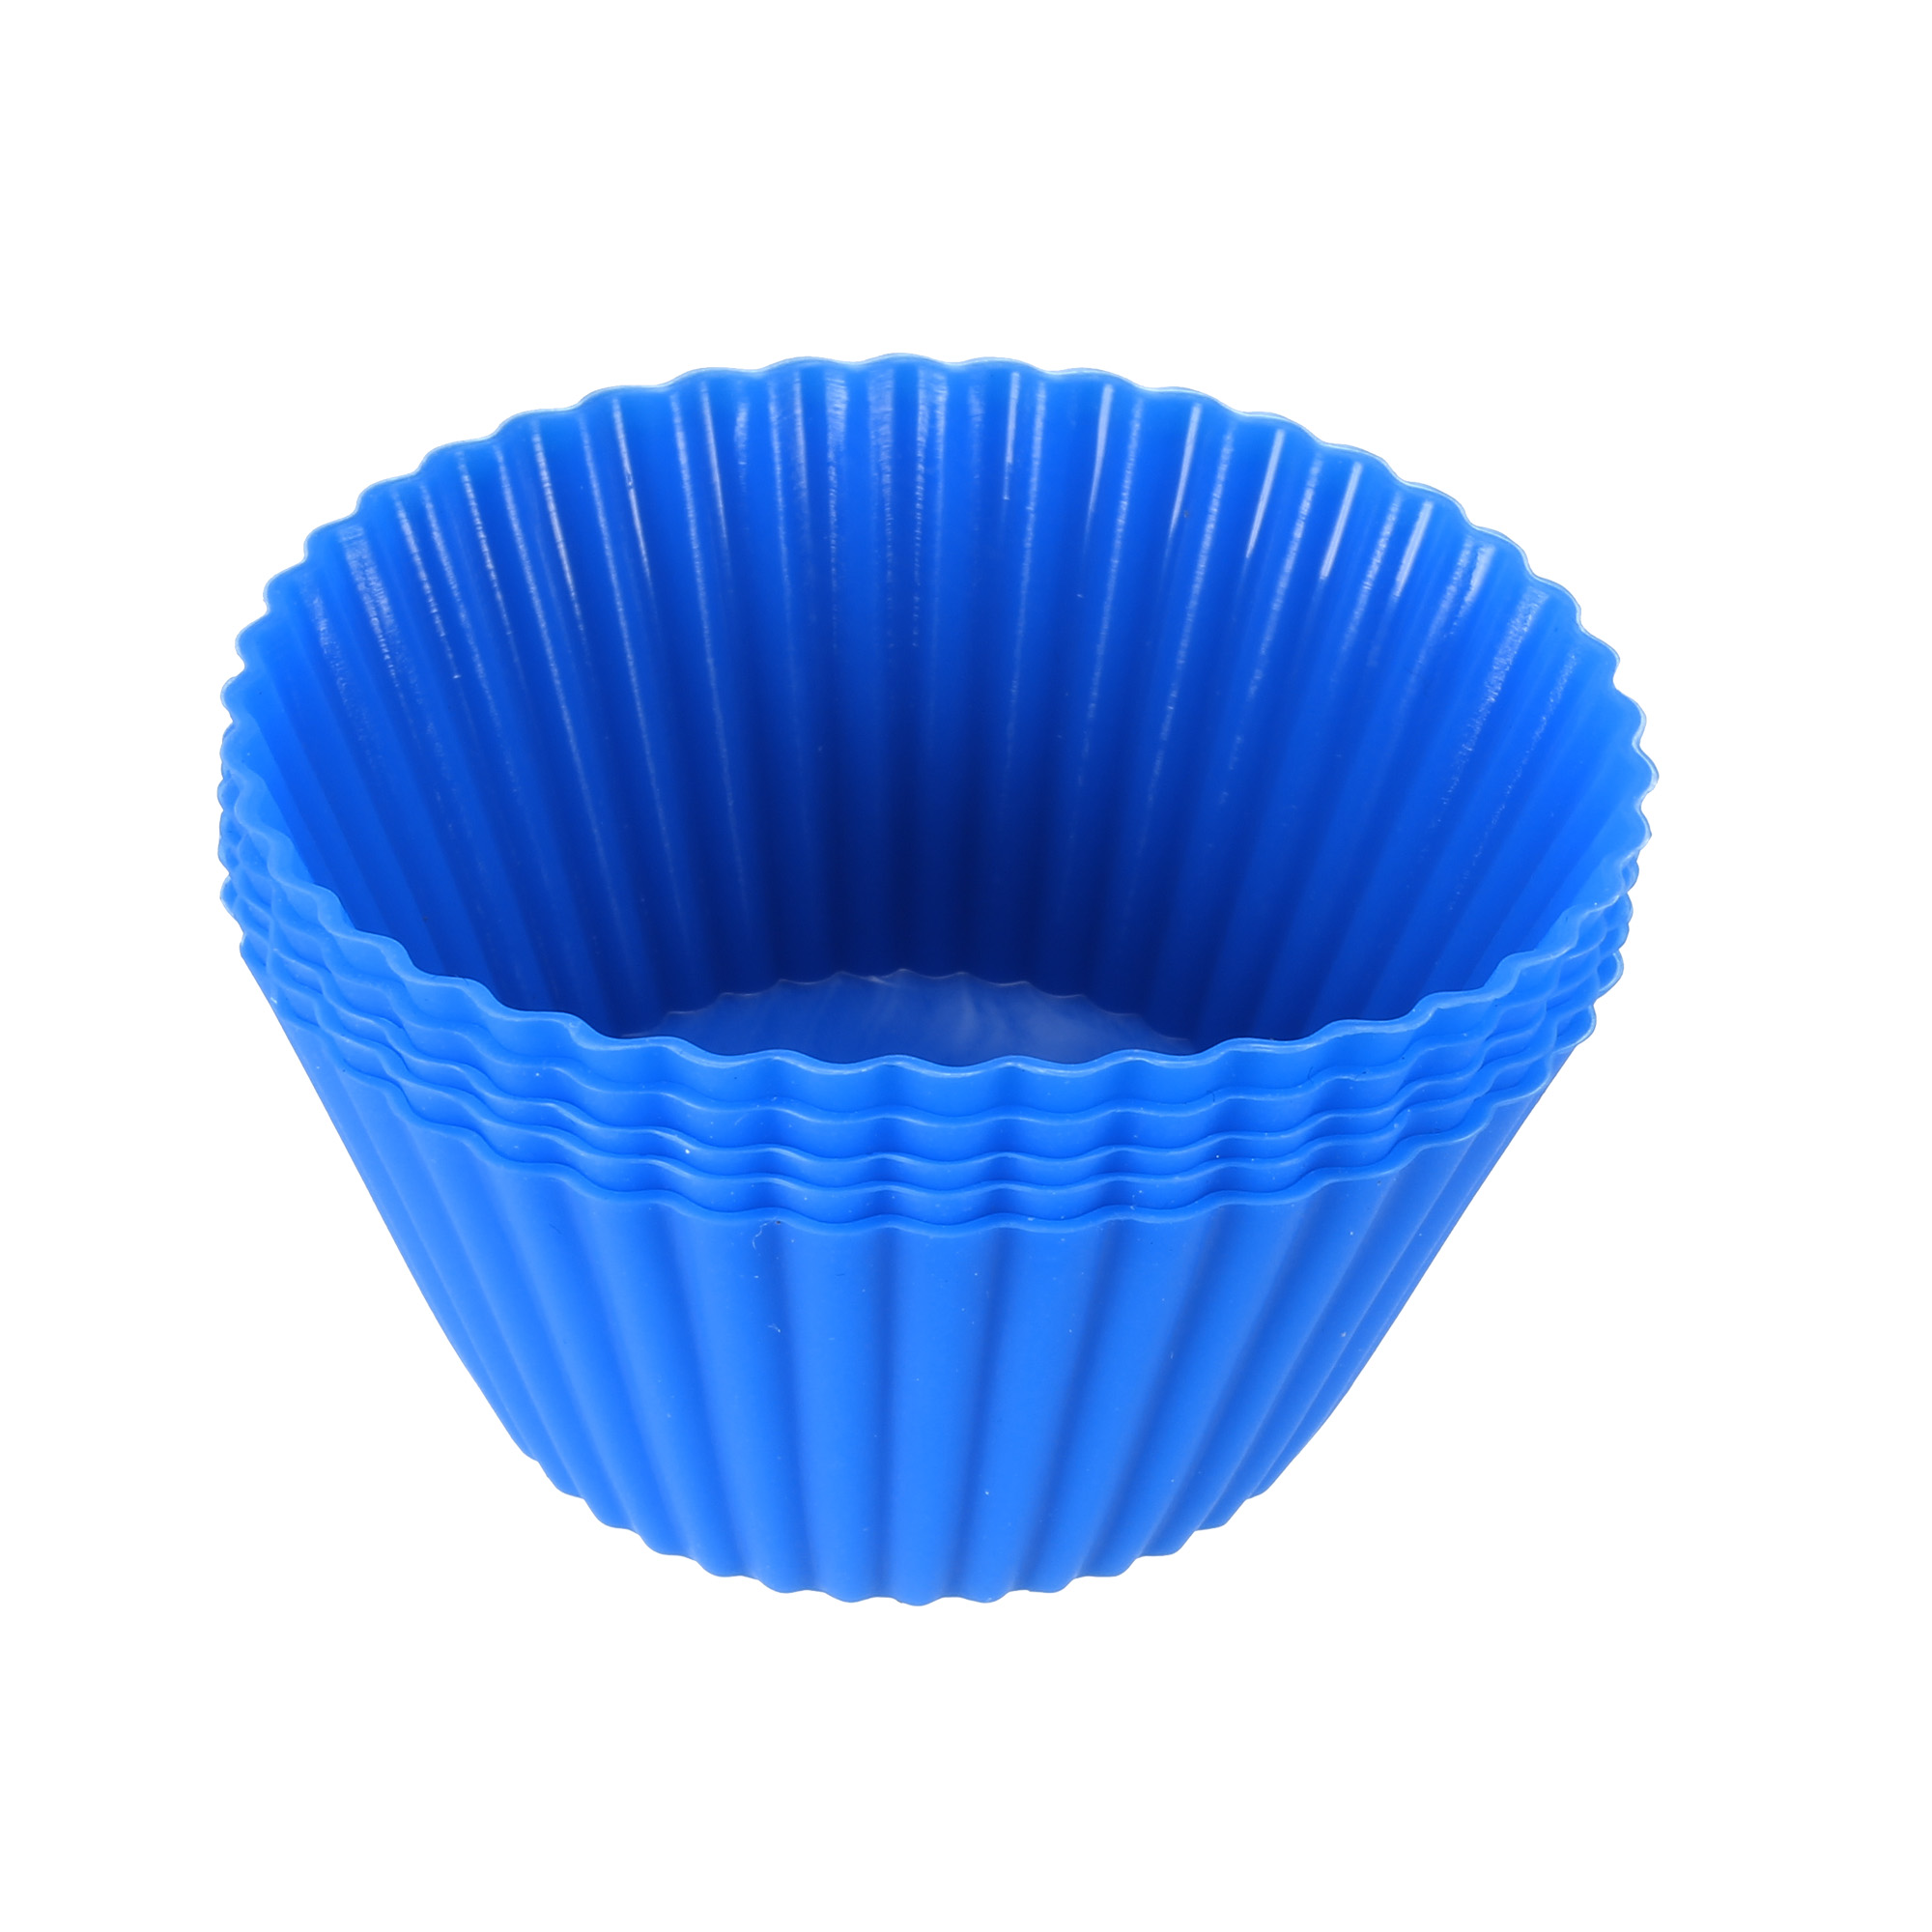 Cofee Gold F-blue 50pcs Cupcake Cups Muffin Liner Baking Cups muffin cup baking Oil Proof Non-stick High Temperature Resistant 